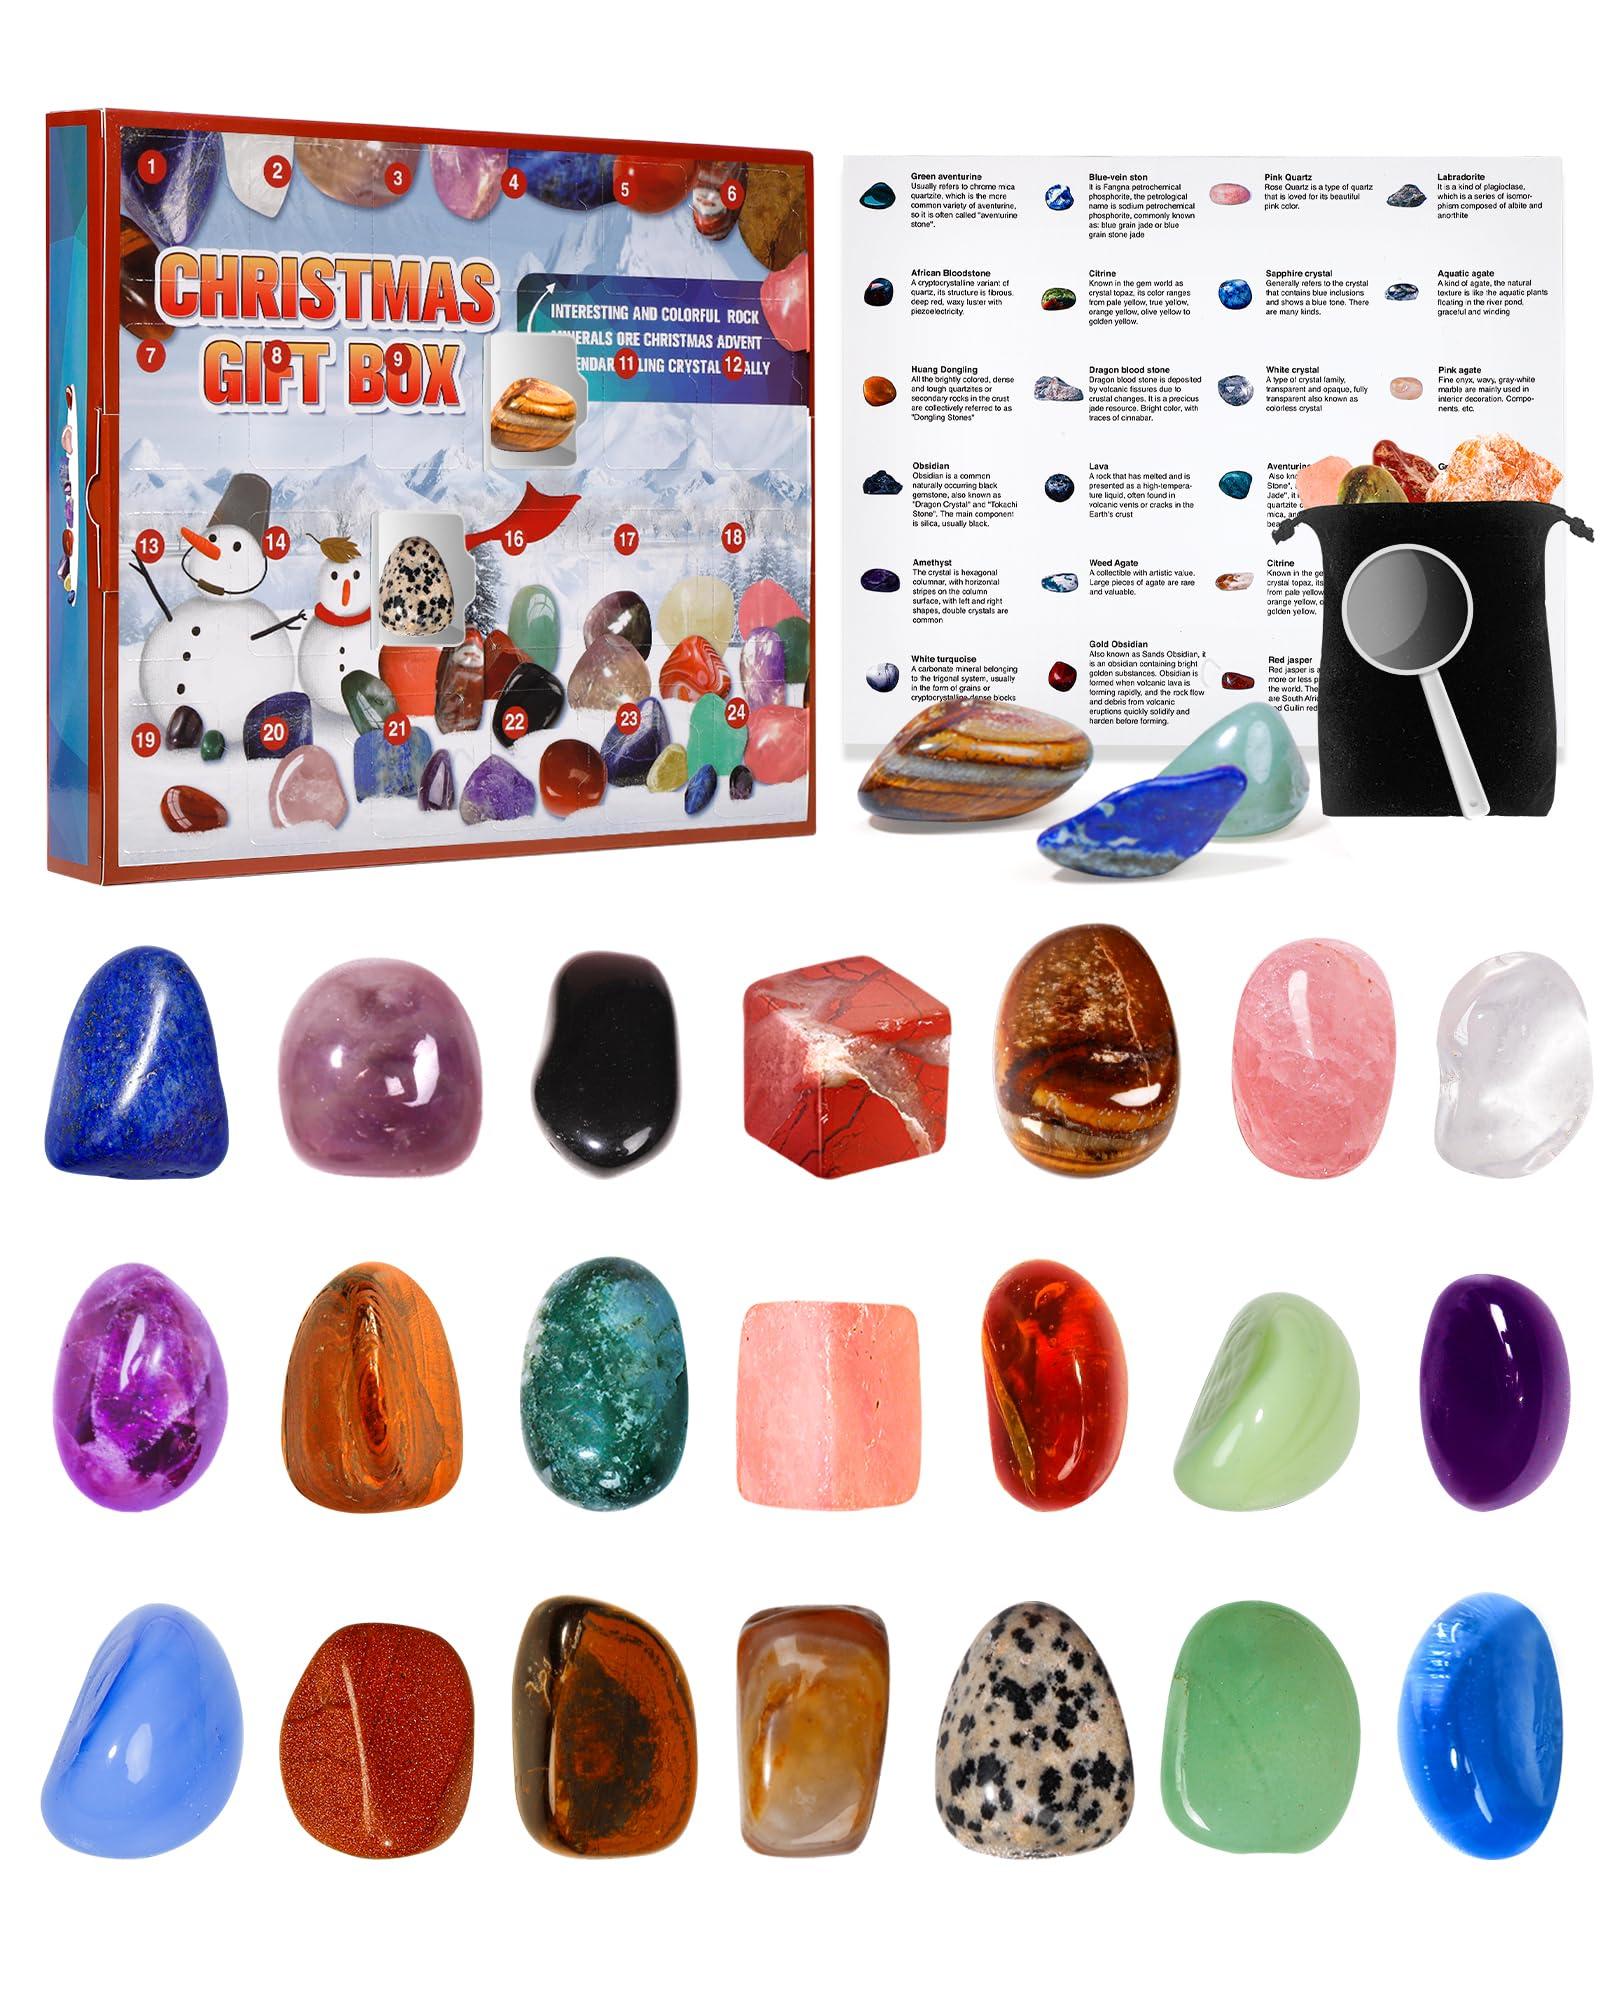 Gemstone Advent Calendar 2023 For Kids, Christmas Countdown Calender, 24 PCS Crystals, Natural Rock Stones and Minerals, DIY Advent Calendar, Christmas Gifts for Girls Boys Geology Enthusiasts